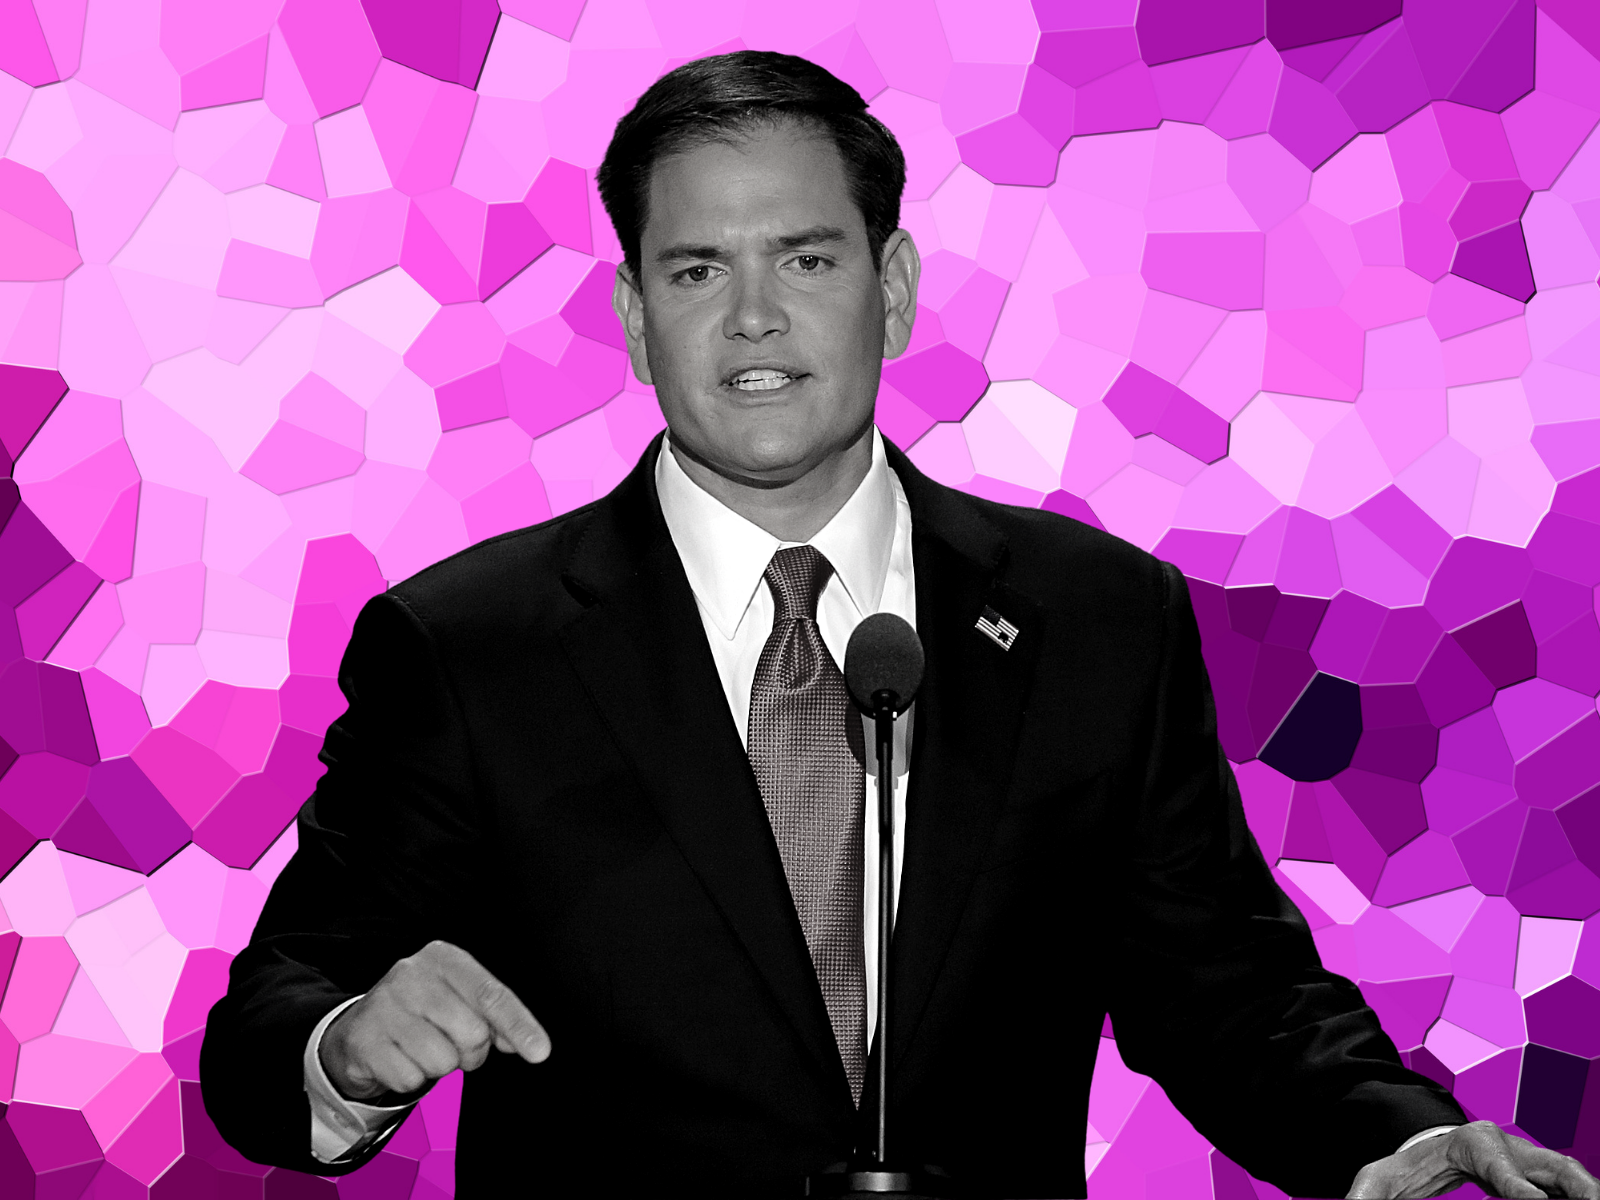 Marco Rubio likens Israeli Rafah incursion to routing Adolf Hitler from a bunker